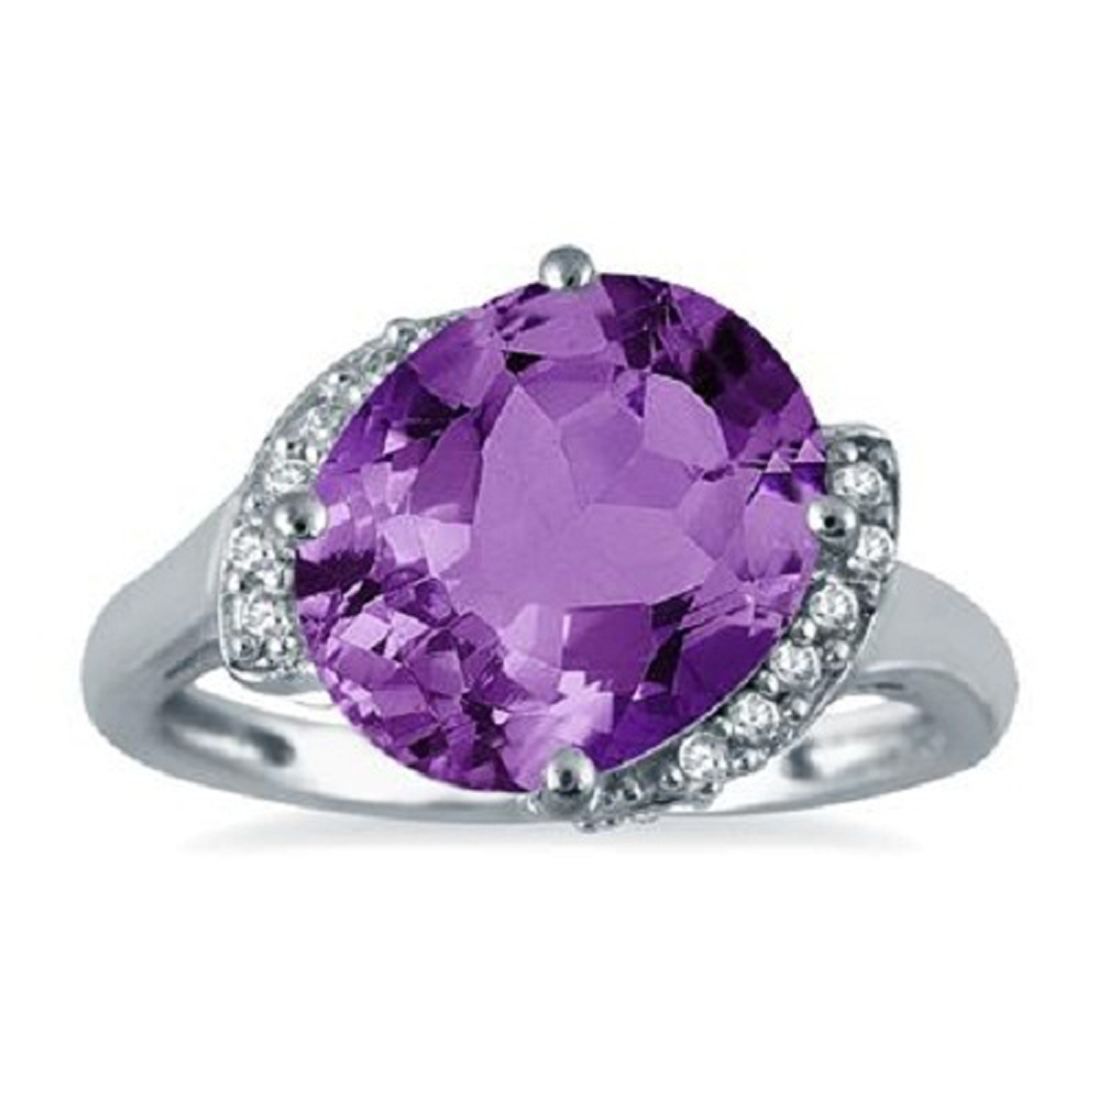 4.50 Carat oval Amethyst & Simulated Diamond Ring In 14K White Gold ...